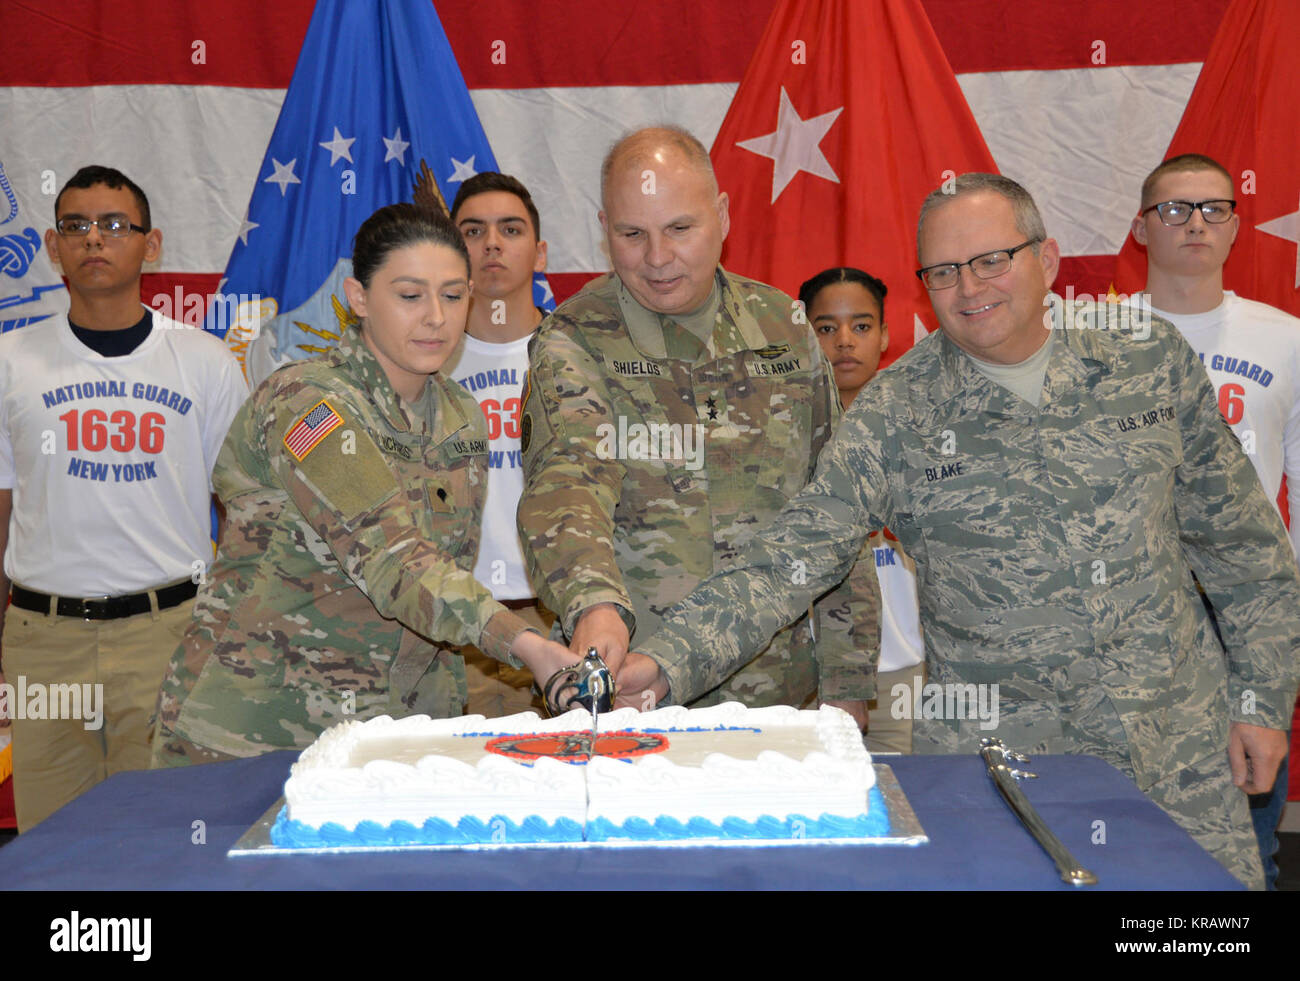 Maj. Gen. Raymond Shields, commander of the New York Army National Guard (middle) joins Air National Guard Chief Master Sgt. Michael Blake, age 58 the oldest  National Guard members present (right) and Army National Guard Spec. Jade Richards, age 19, one of the youngest members of the New York National Guard in cutting a cake in celebration of the National Guard’s 381th birthday at New York National Guard headquarters  in Latham, N.Y. on December, 13 2017. The National Guard was established in 1636 and is the oldest military force in the Department of Defense.  (U.S. Army National Guard Stock Photo